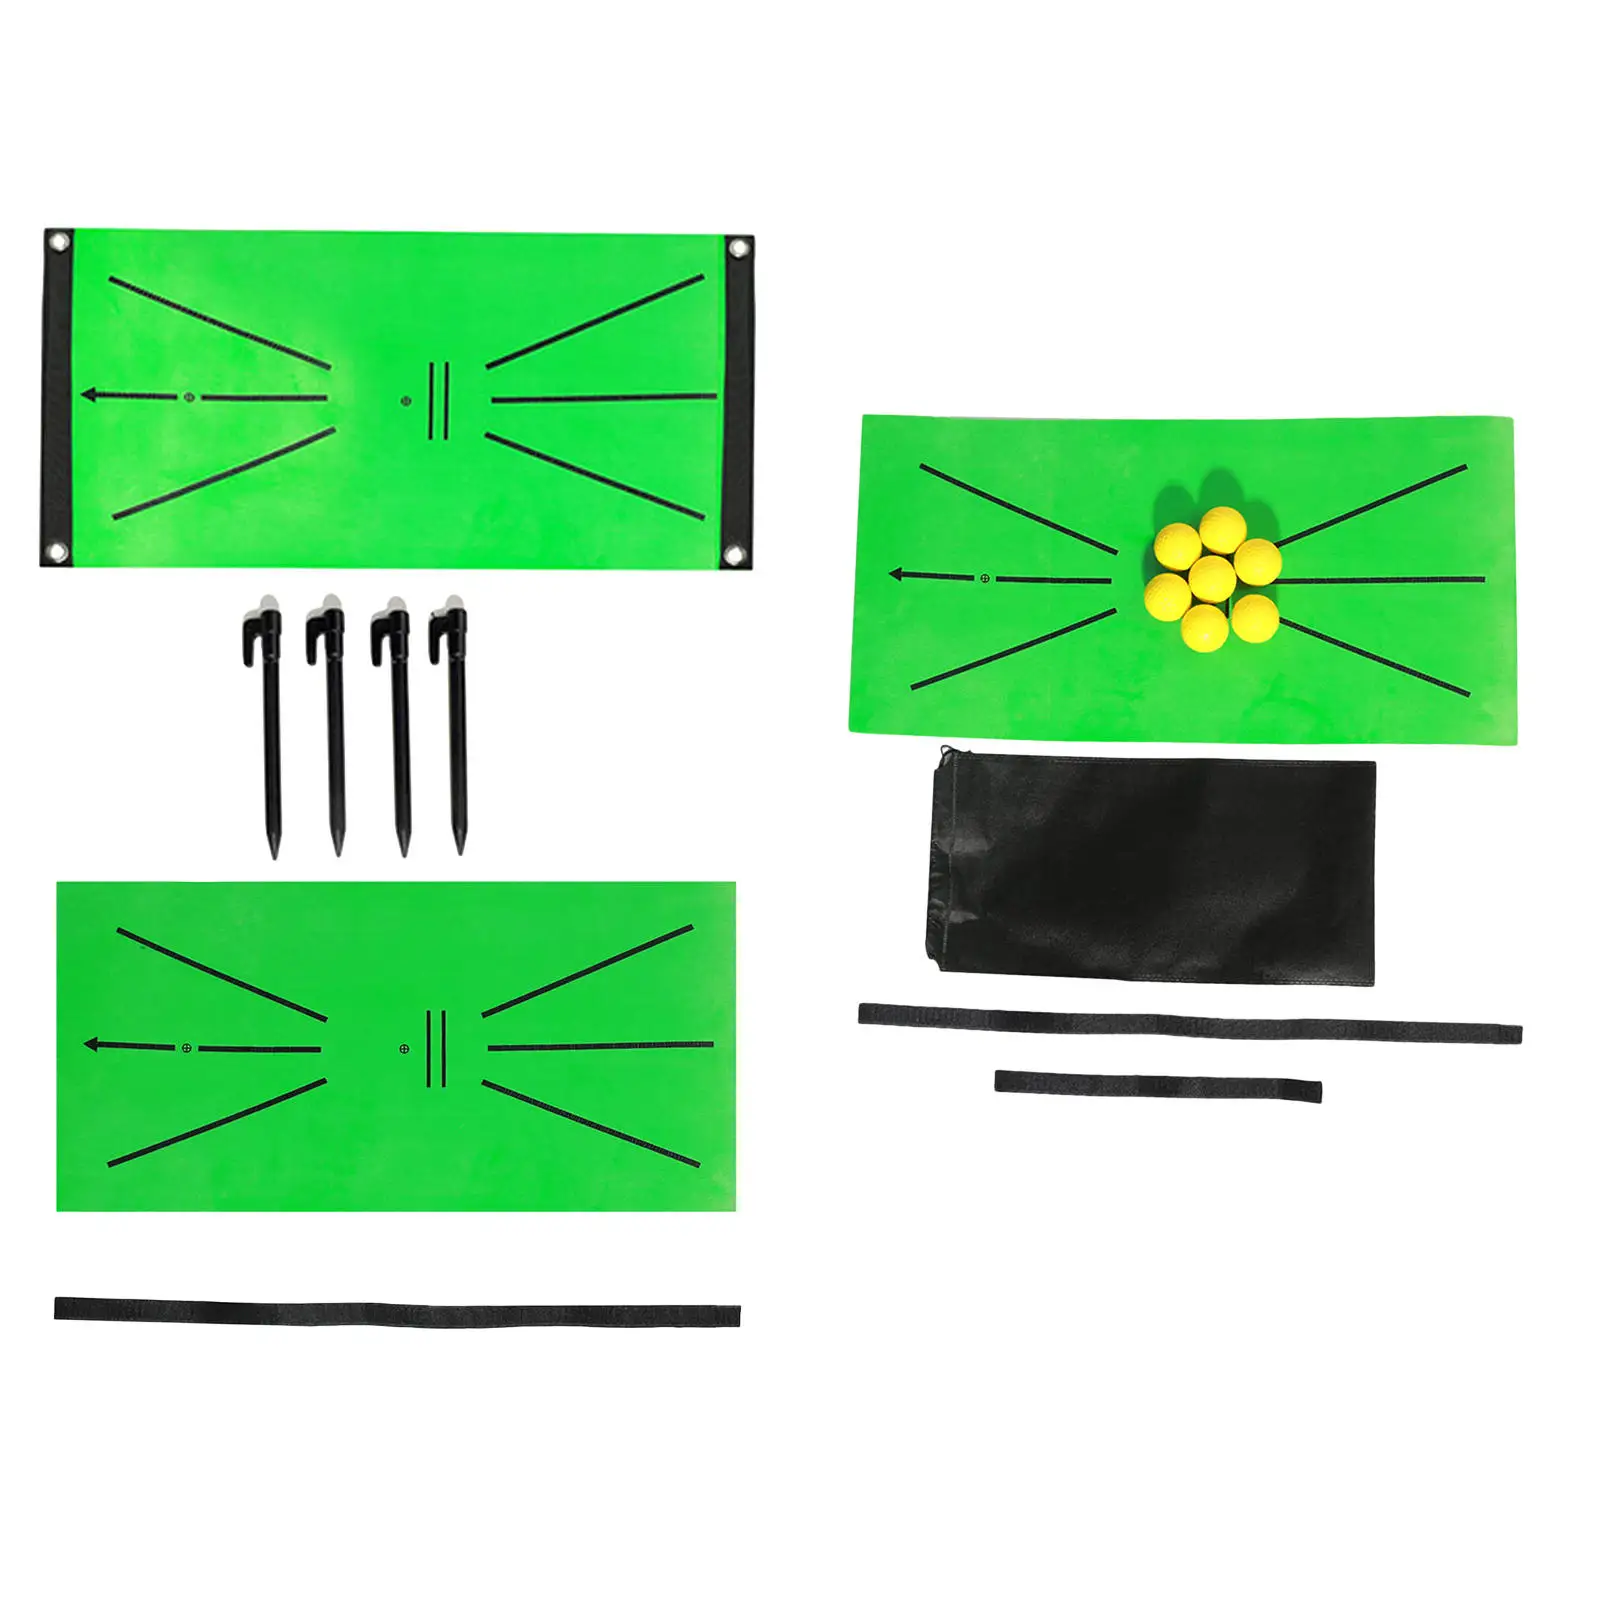 Golf Training Mat Swing Detection Hitting Aid Game Pad Home Office Outdoors